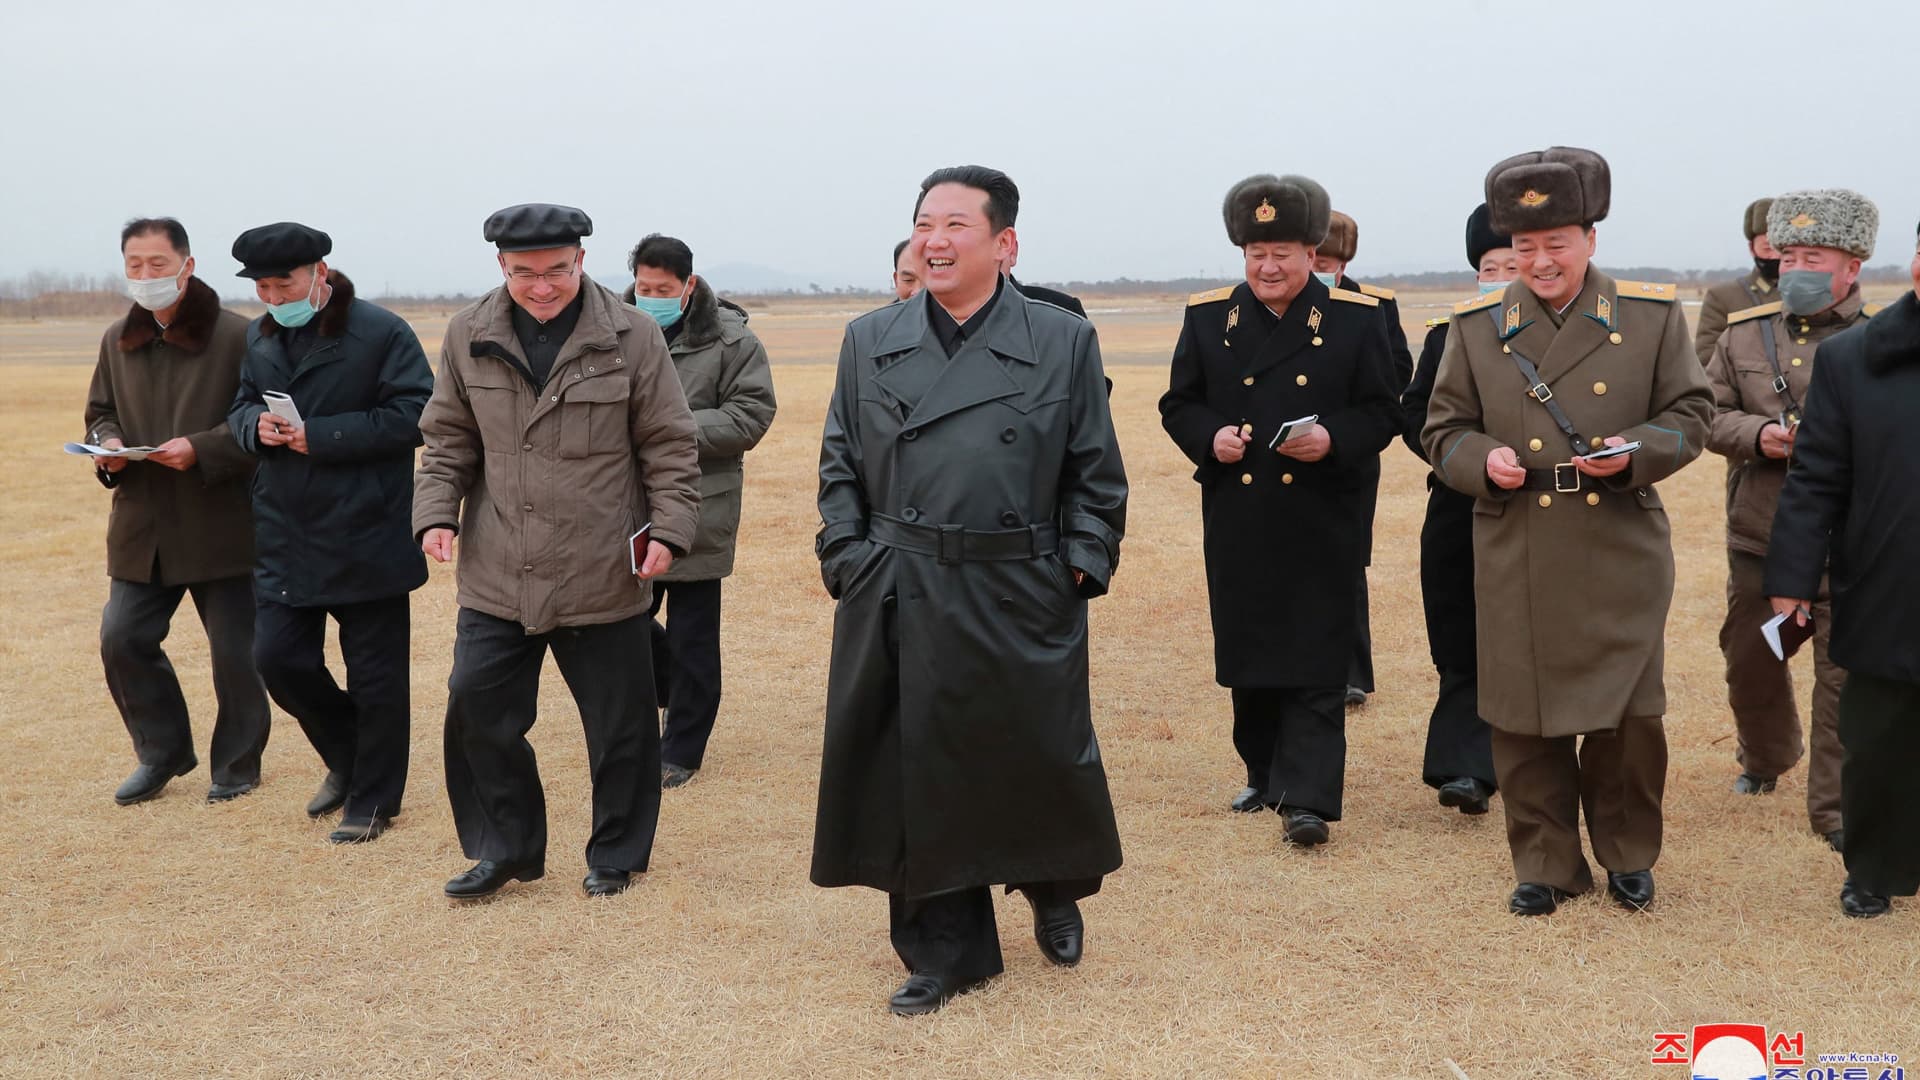 North Korean leader Kim Jong Un inspects the proposed building site for the Ryonpho Vegetable Greenhouse Farm in the Ryonpho area of Hamju County, North Korea, in this undated photo released January 28, 2022 by North Korea's Korean Central News Agency (KCNA).